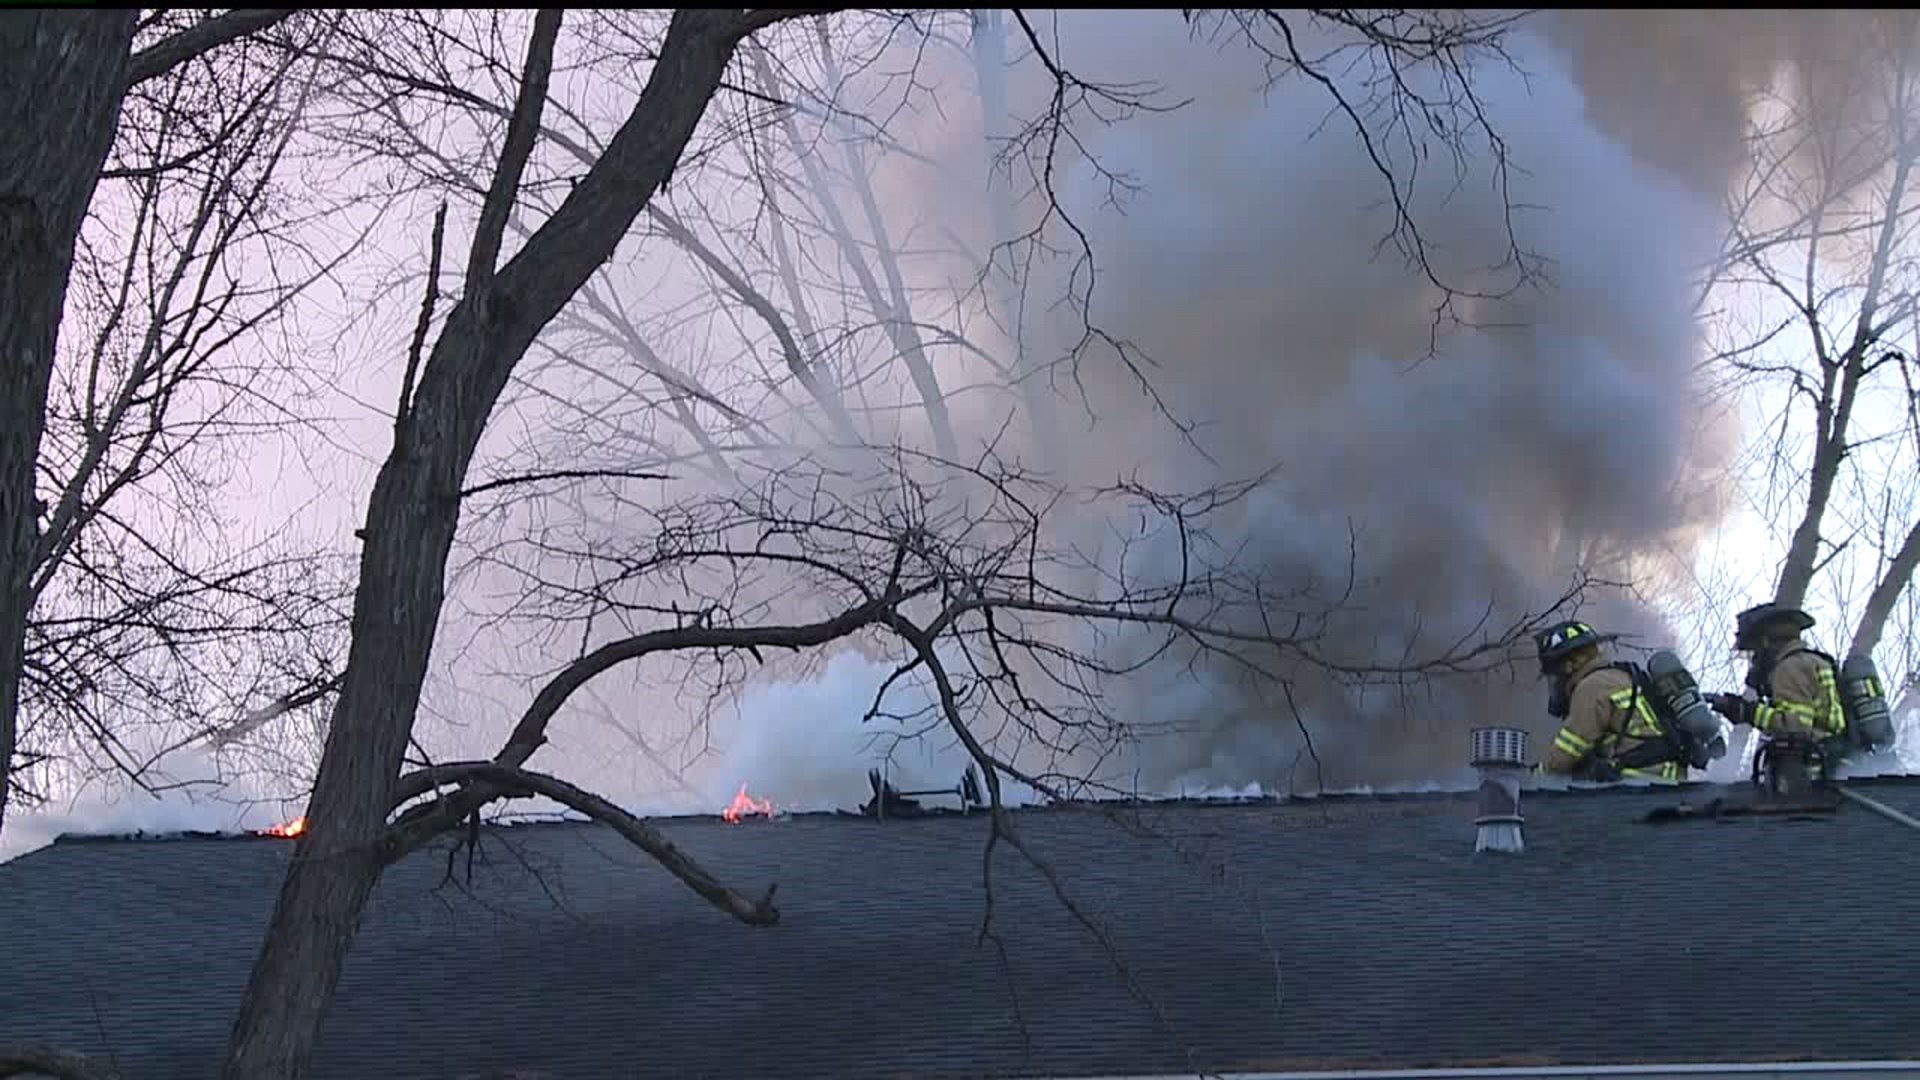 Bettendorf family home catches fire on Christmas